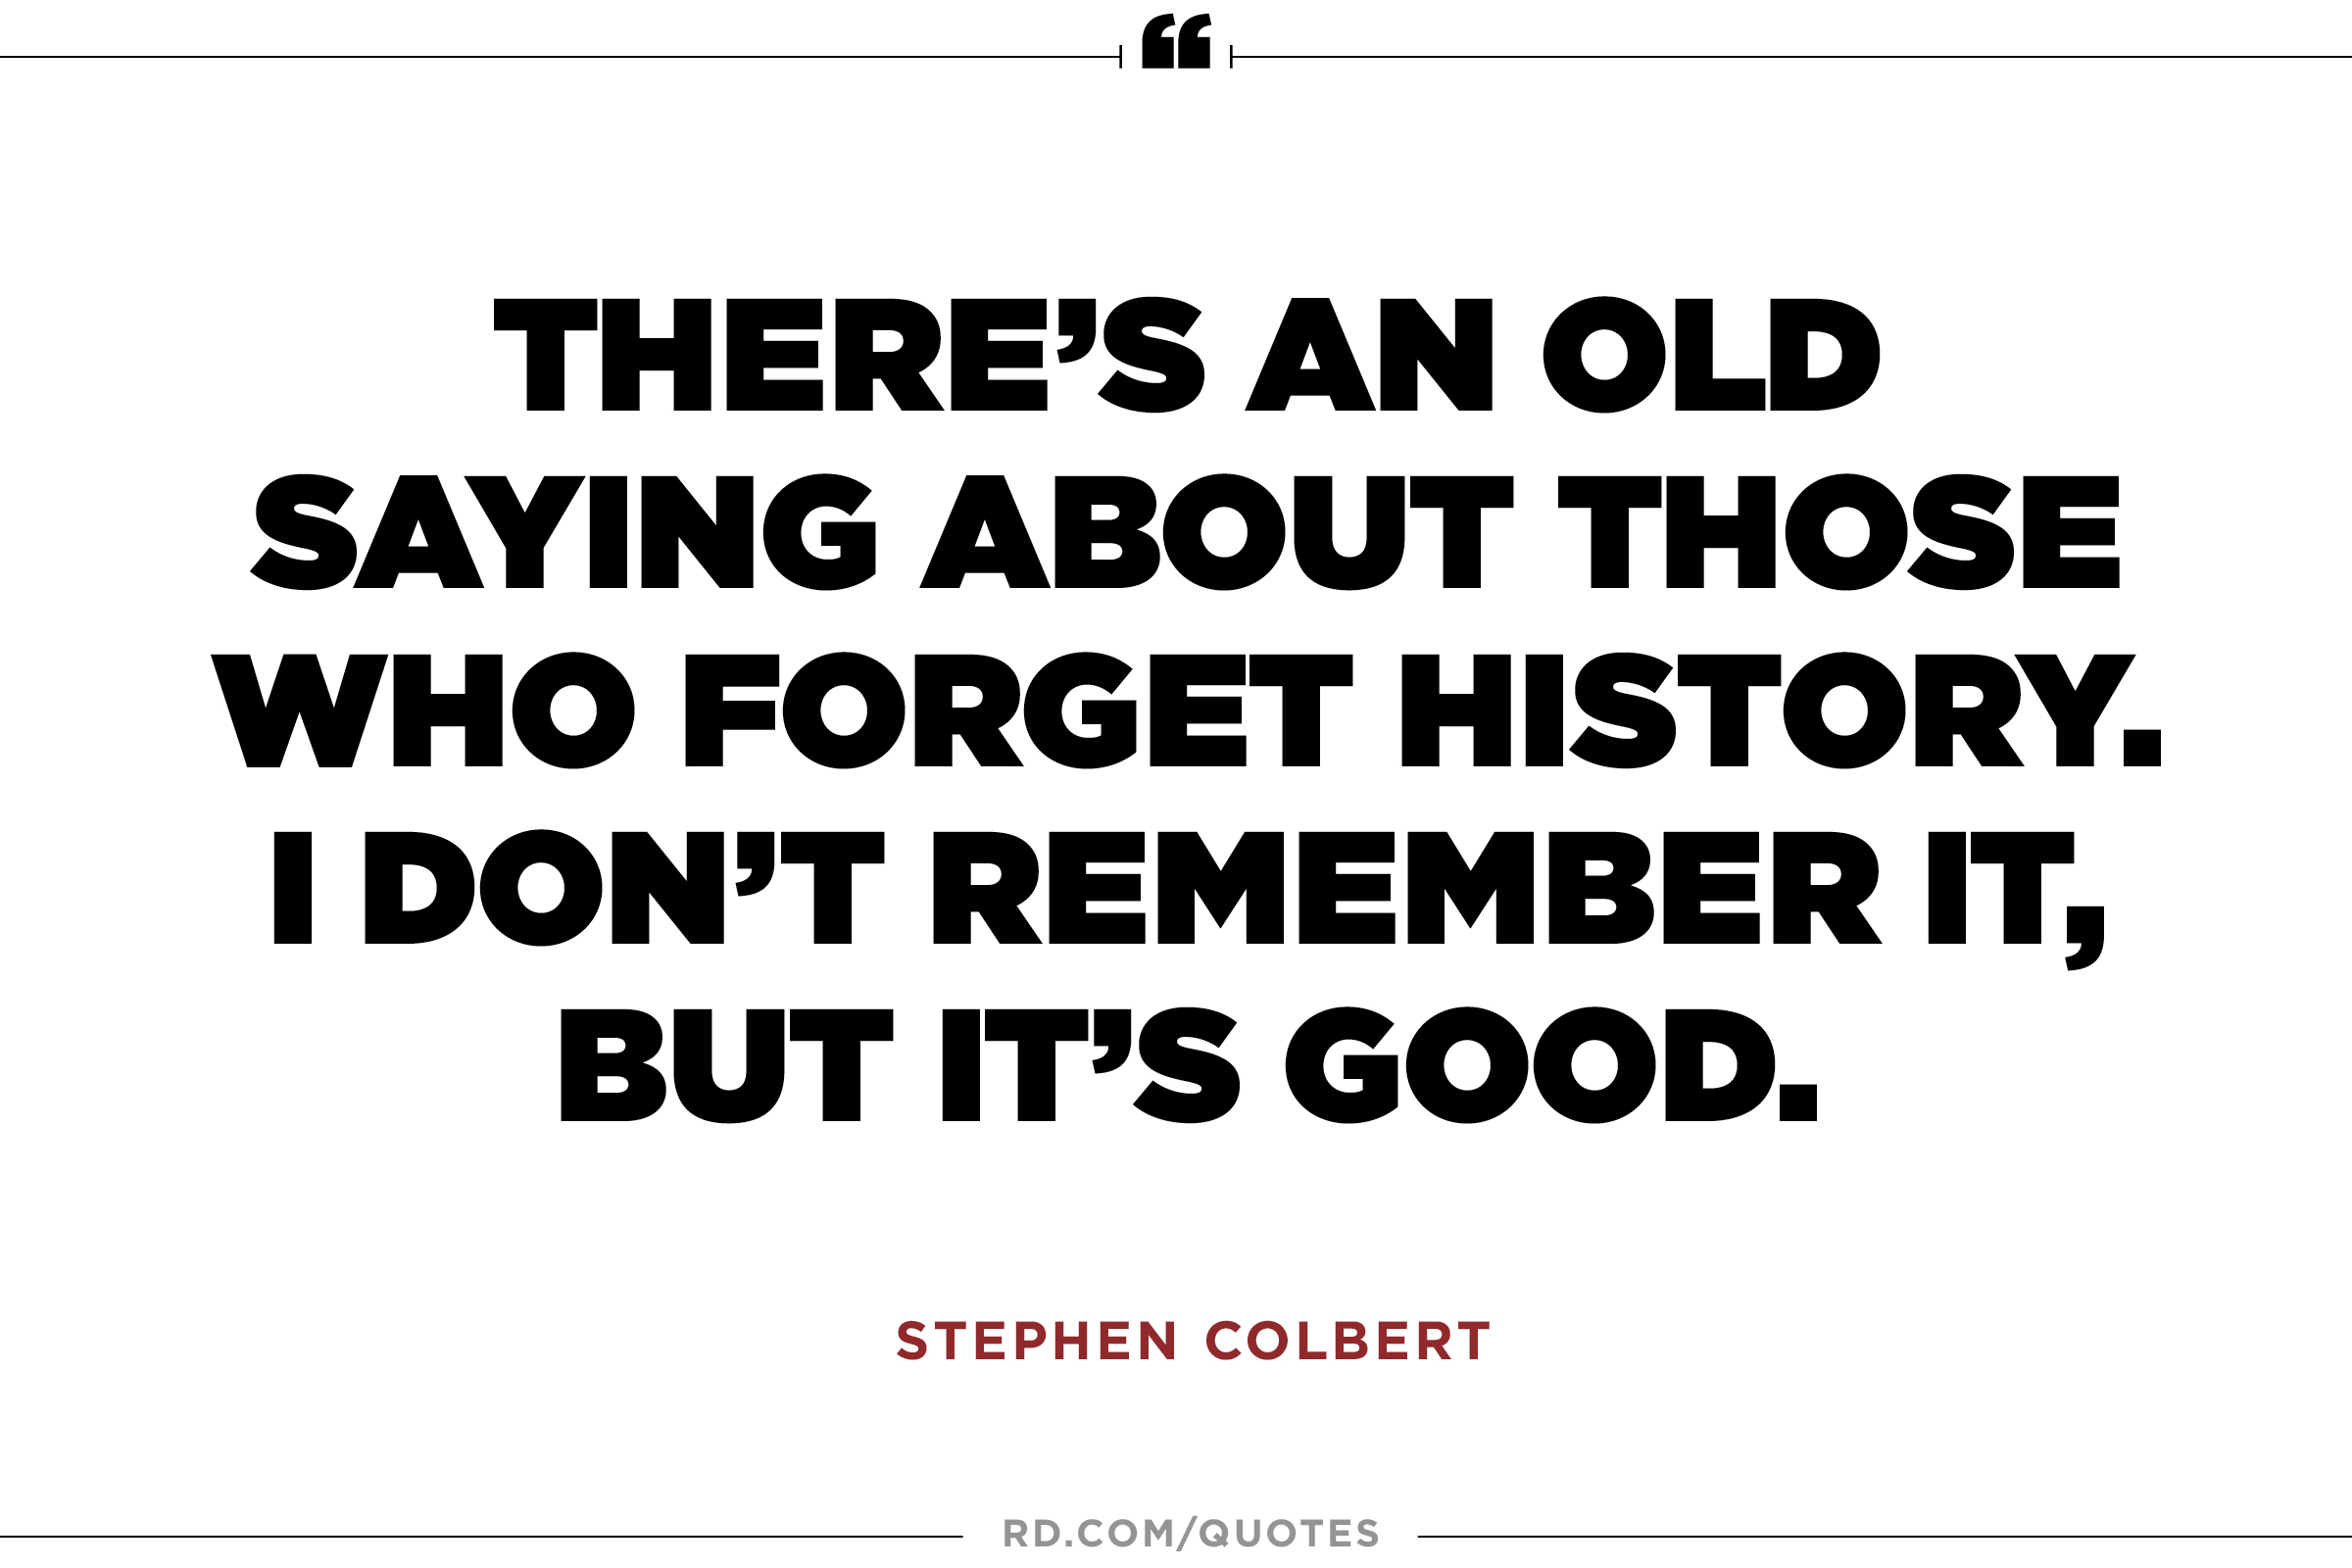 There's an old saying about those who forget history. I don't remember it, but it's good. Stephen Colbert